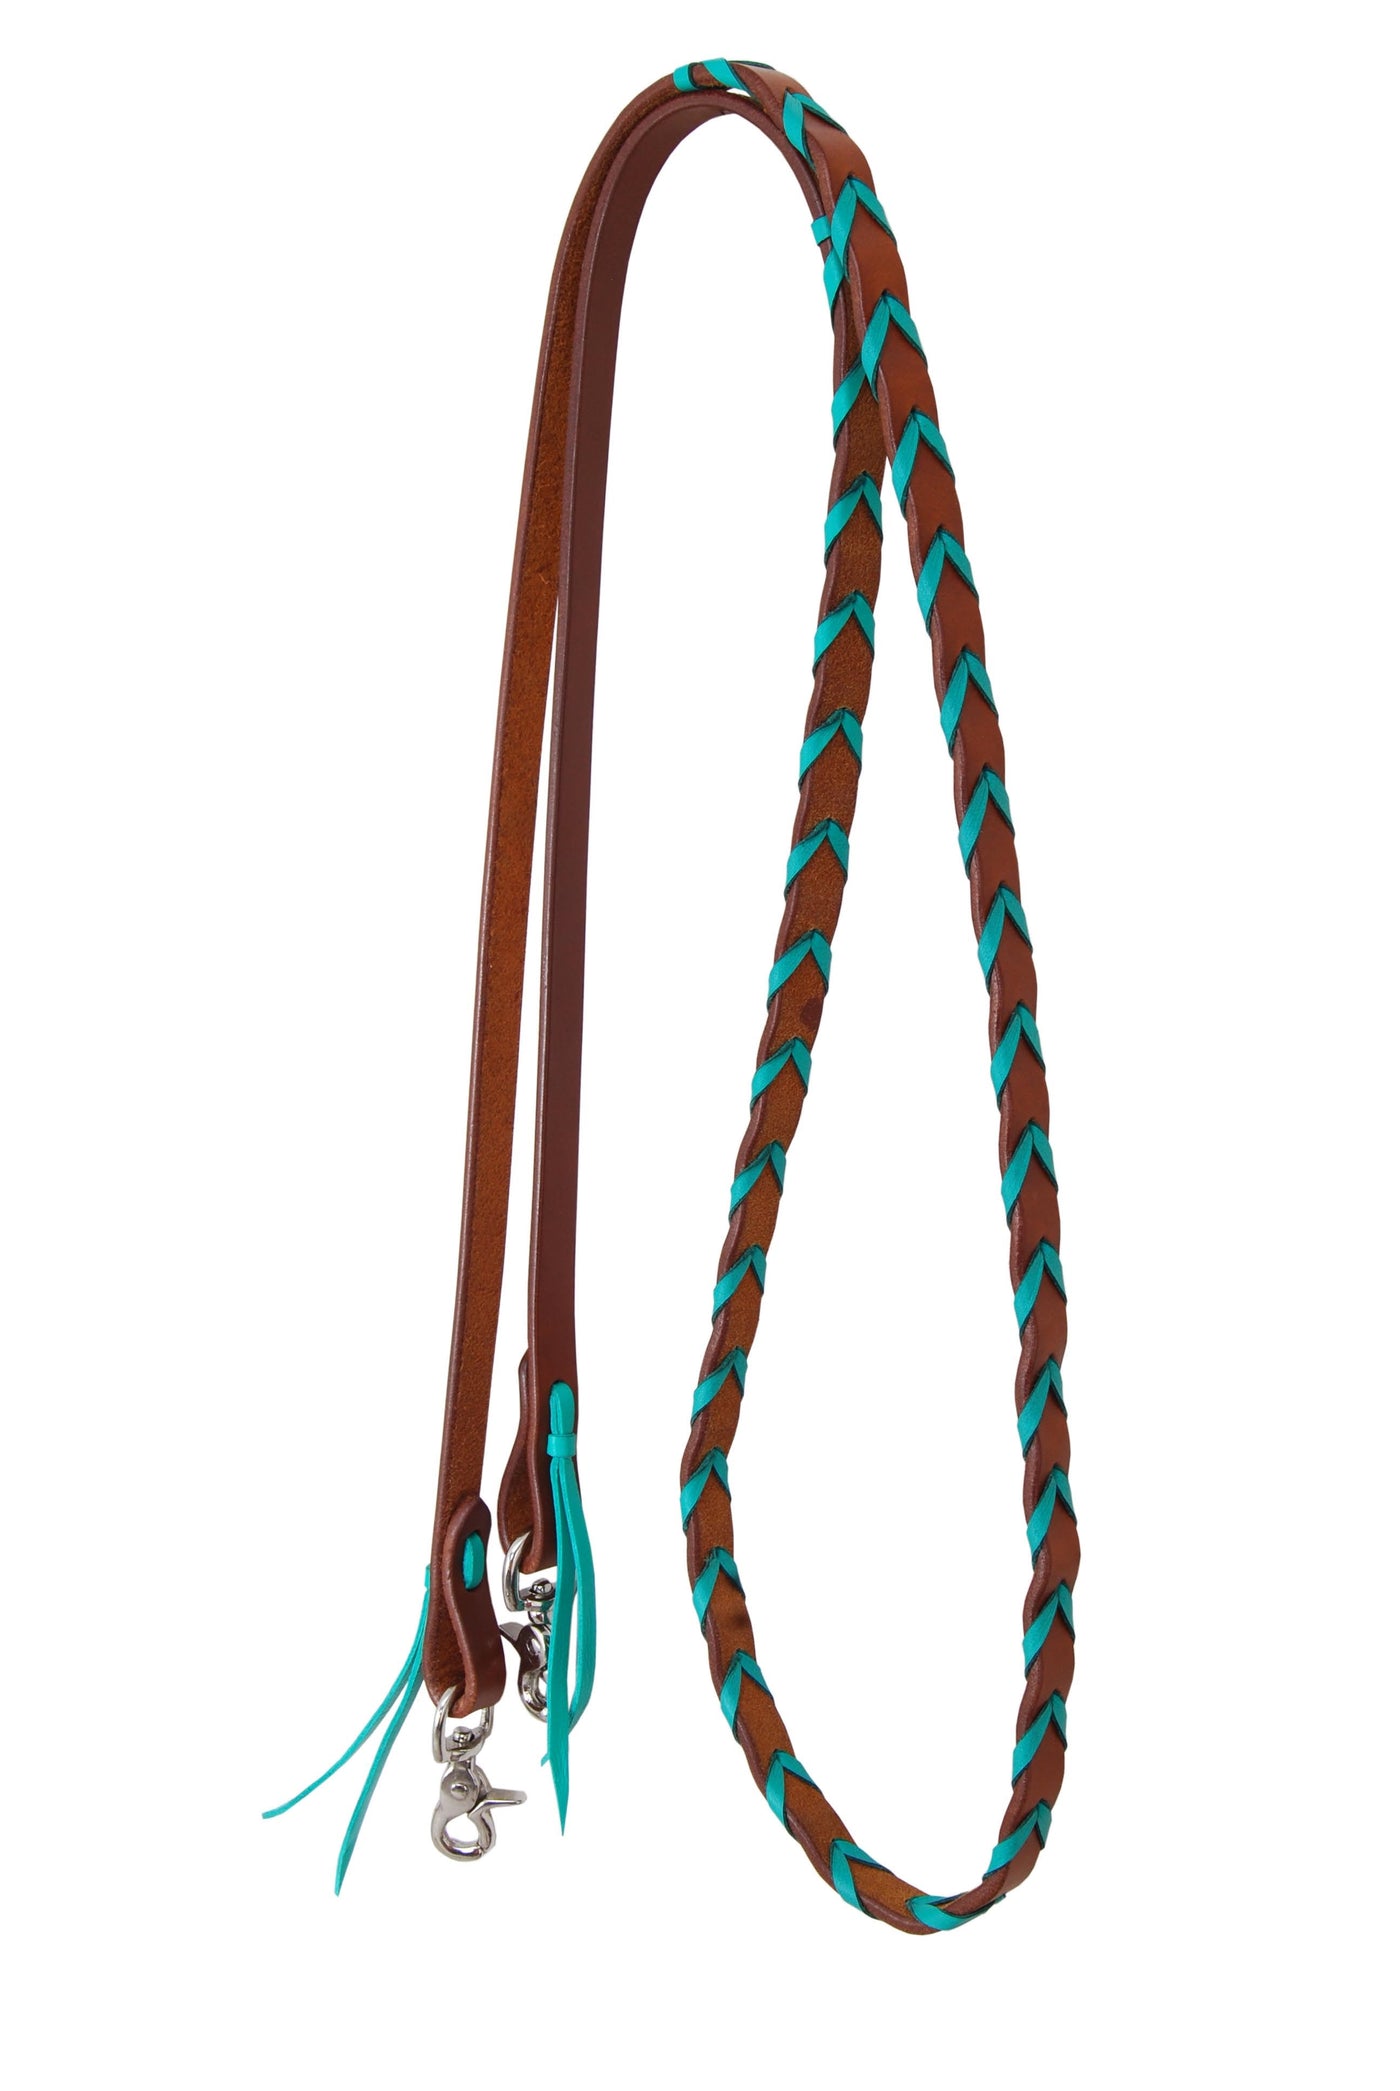 Rafter T Ranch Painted Cactus Barrel Reins